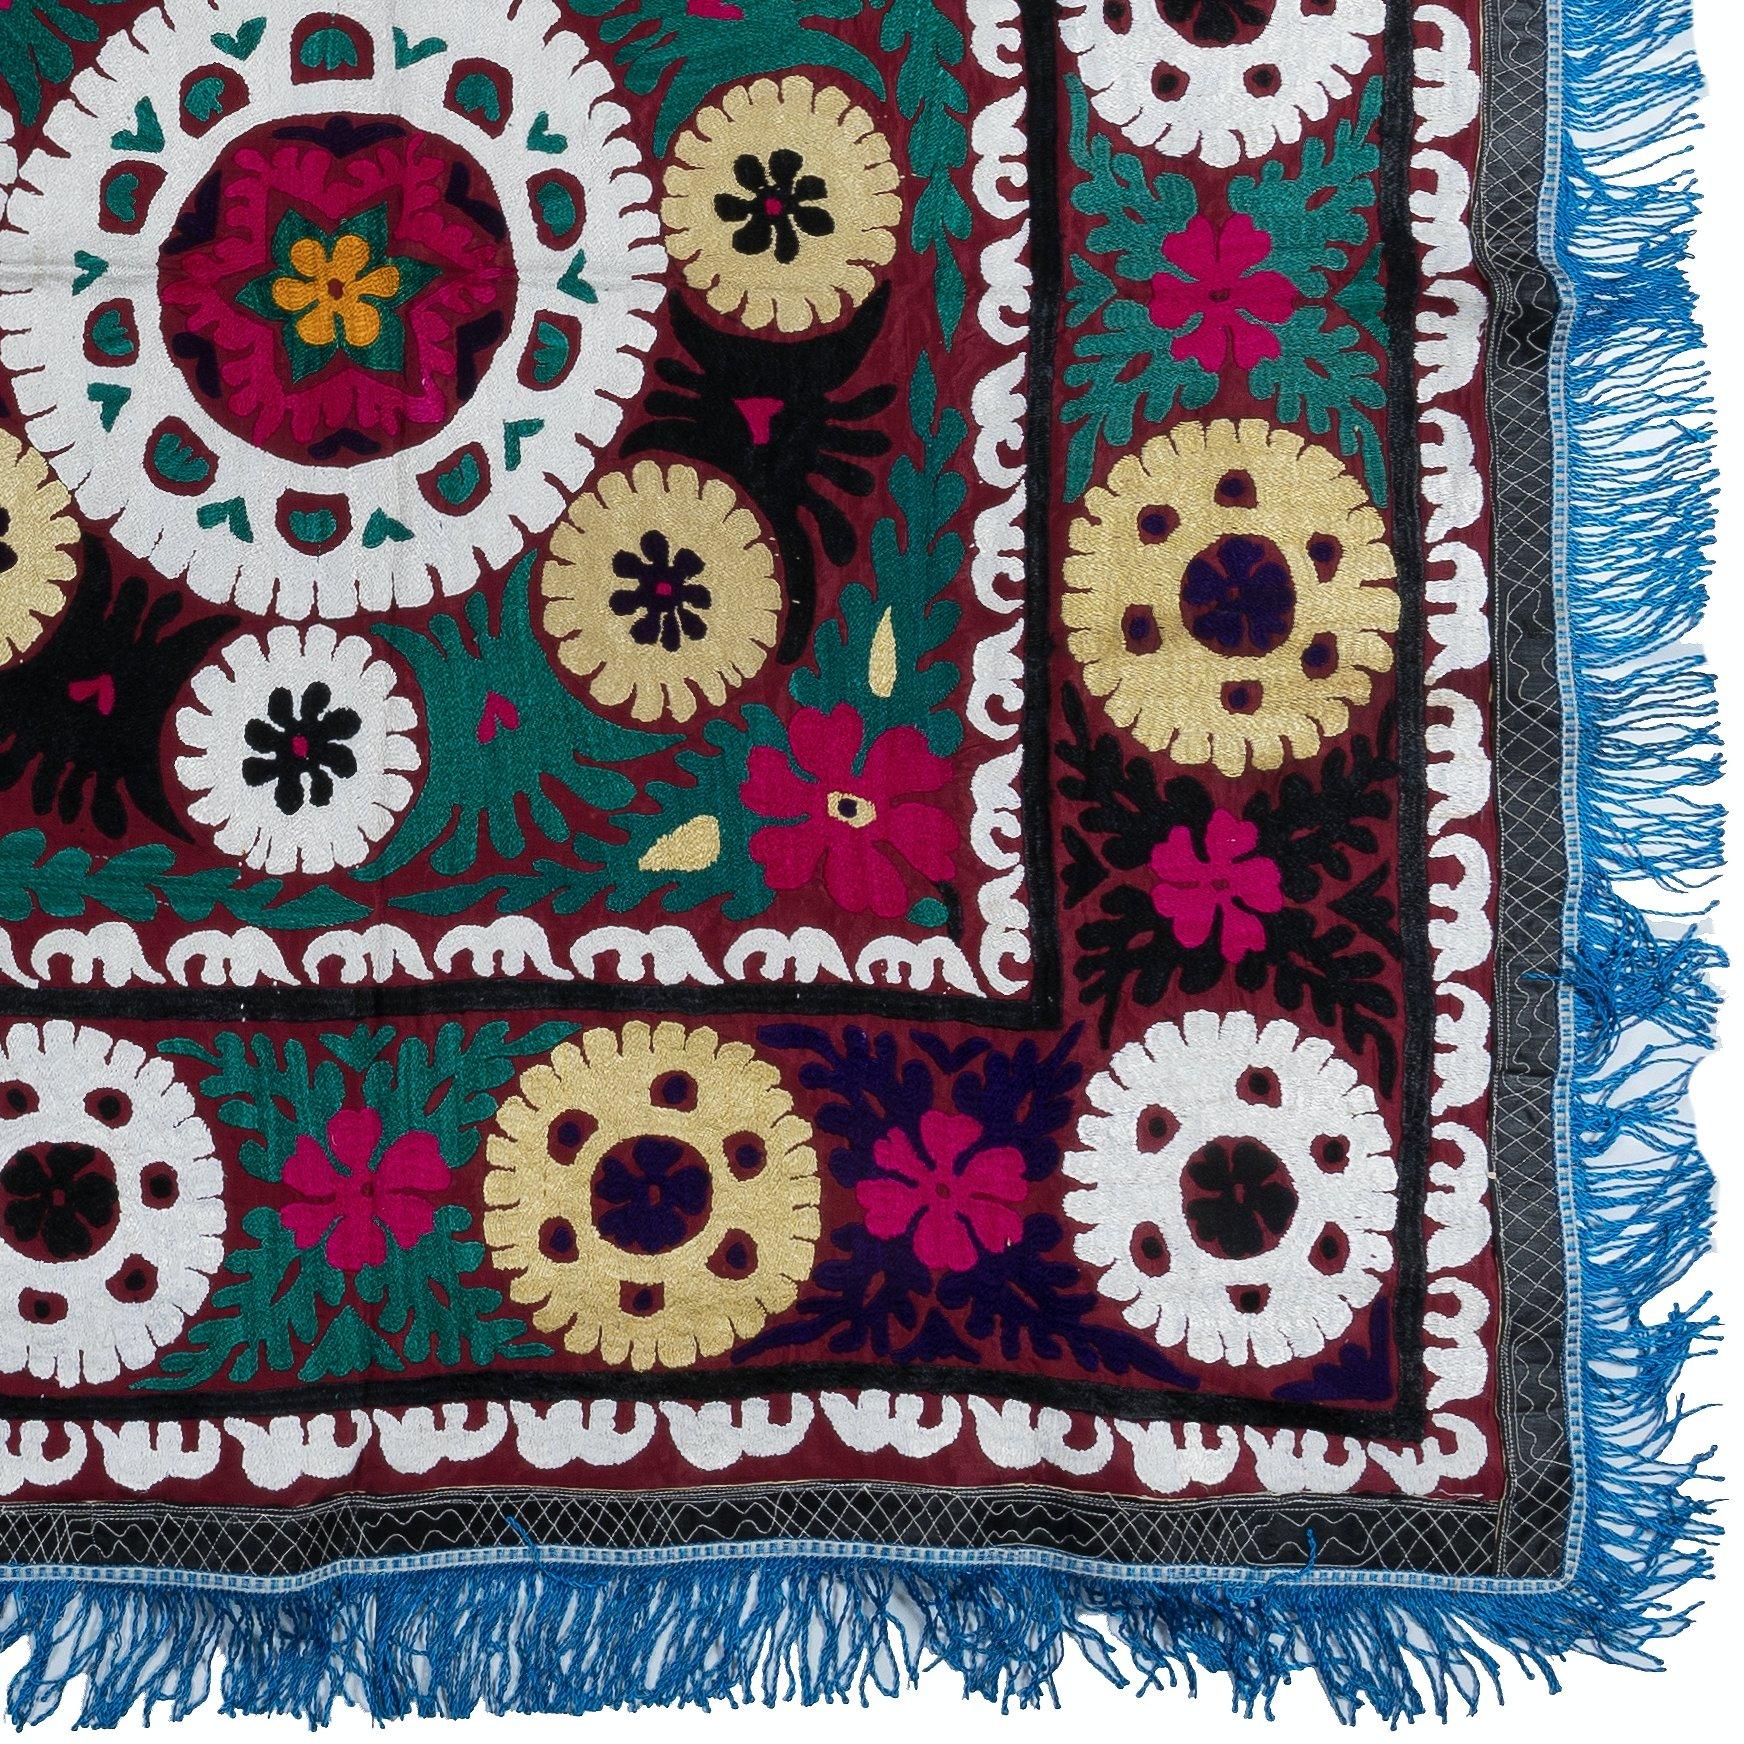 Embroidered 4.7x6.7 ft Suzani Textile Silk Embroidery Wall Hanging, Colorful Uzbek Bedspread For Sale